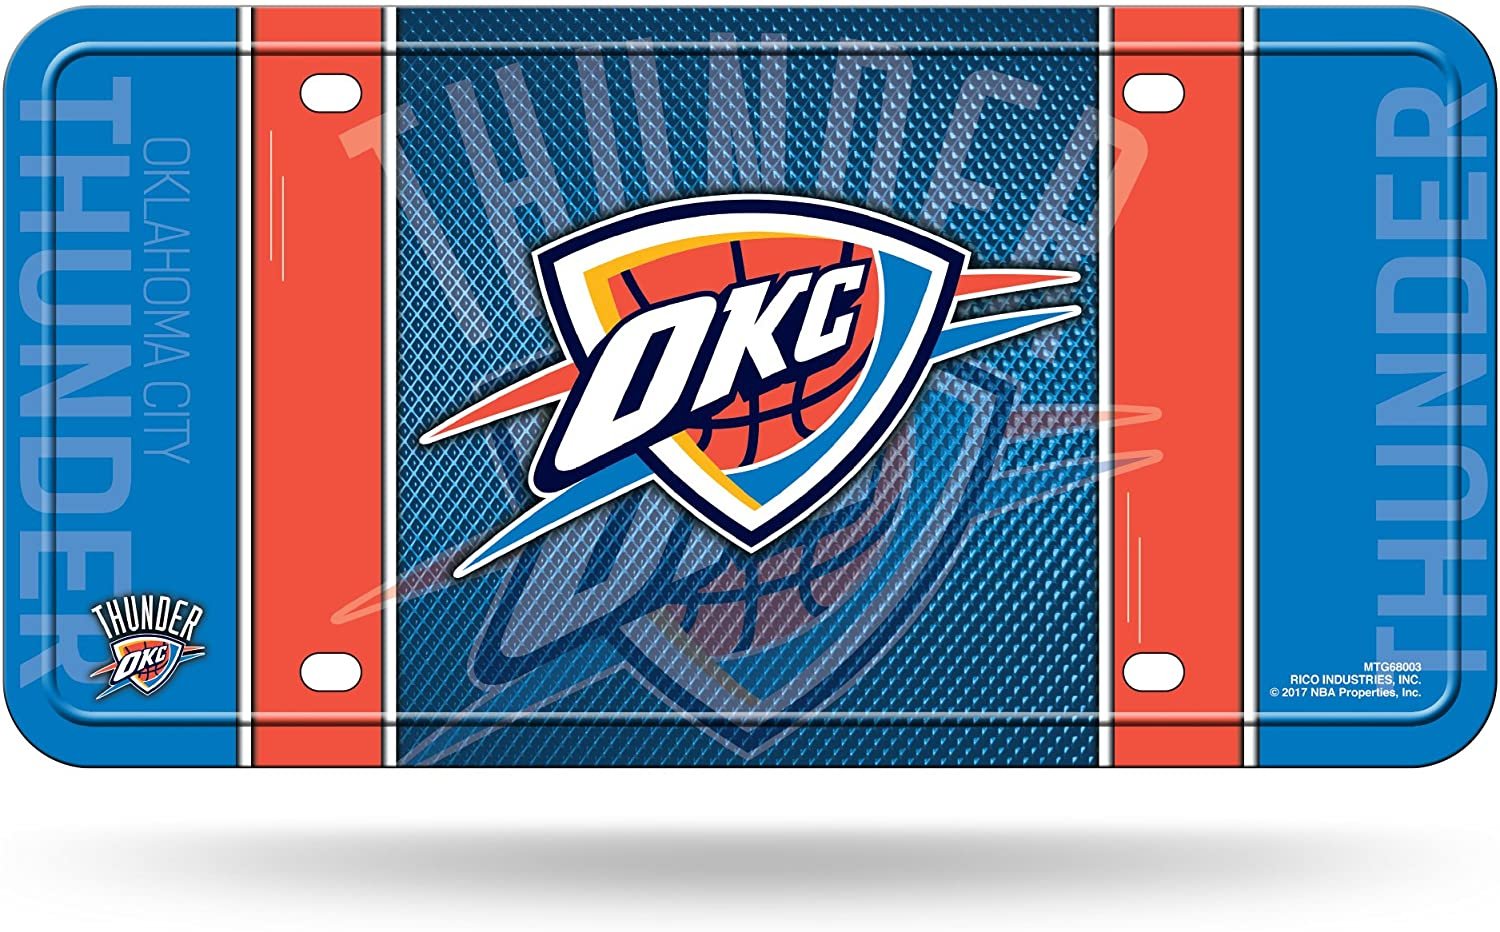 Oklahoma City Thunder Metal Auto Tag License Plate, Jersey Design, 6x12 Inch